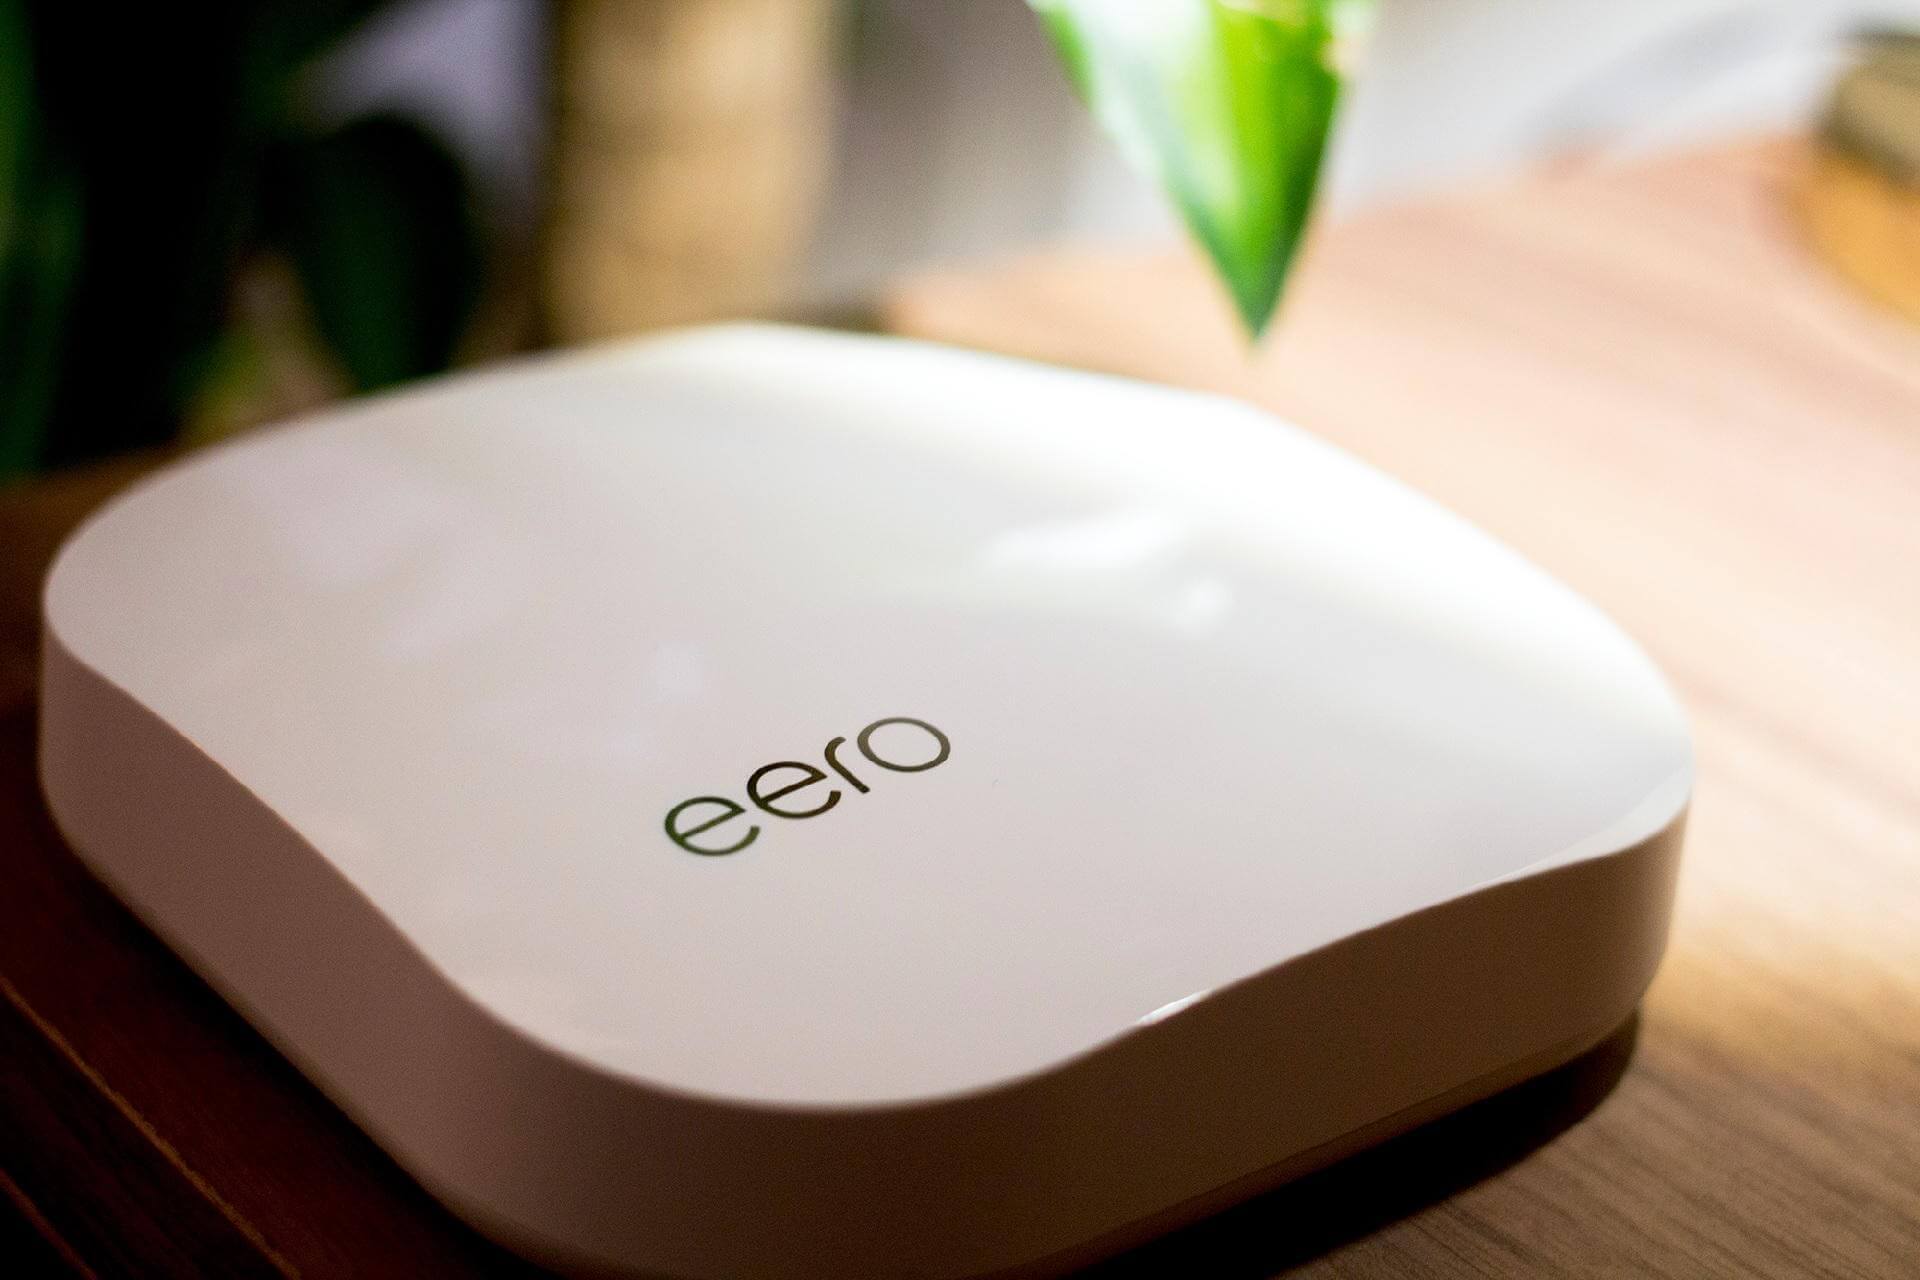 7 Best VPNs for Eero Routers [How to Install & VPN Passthrough]